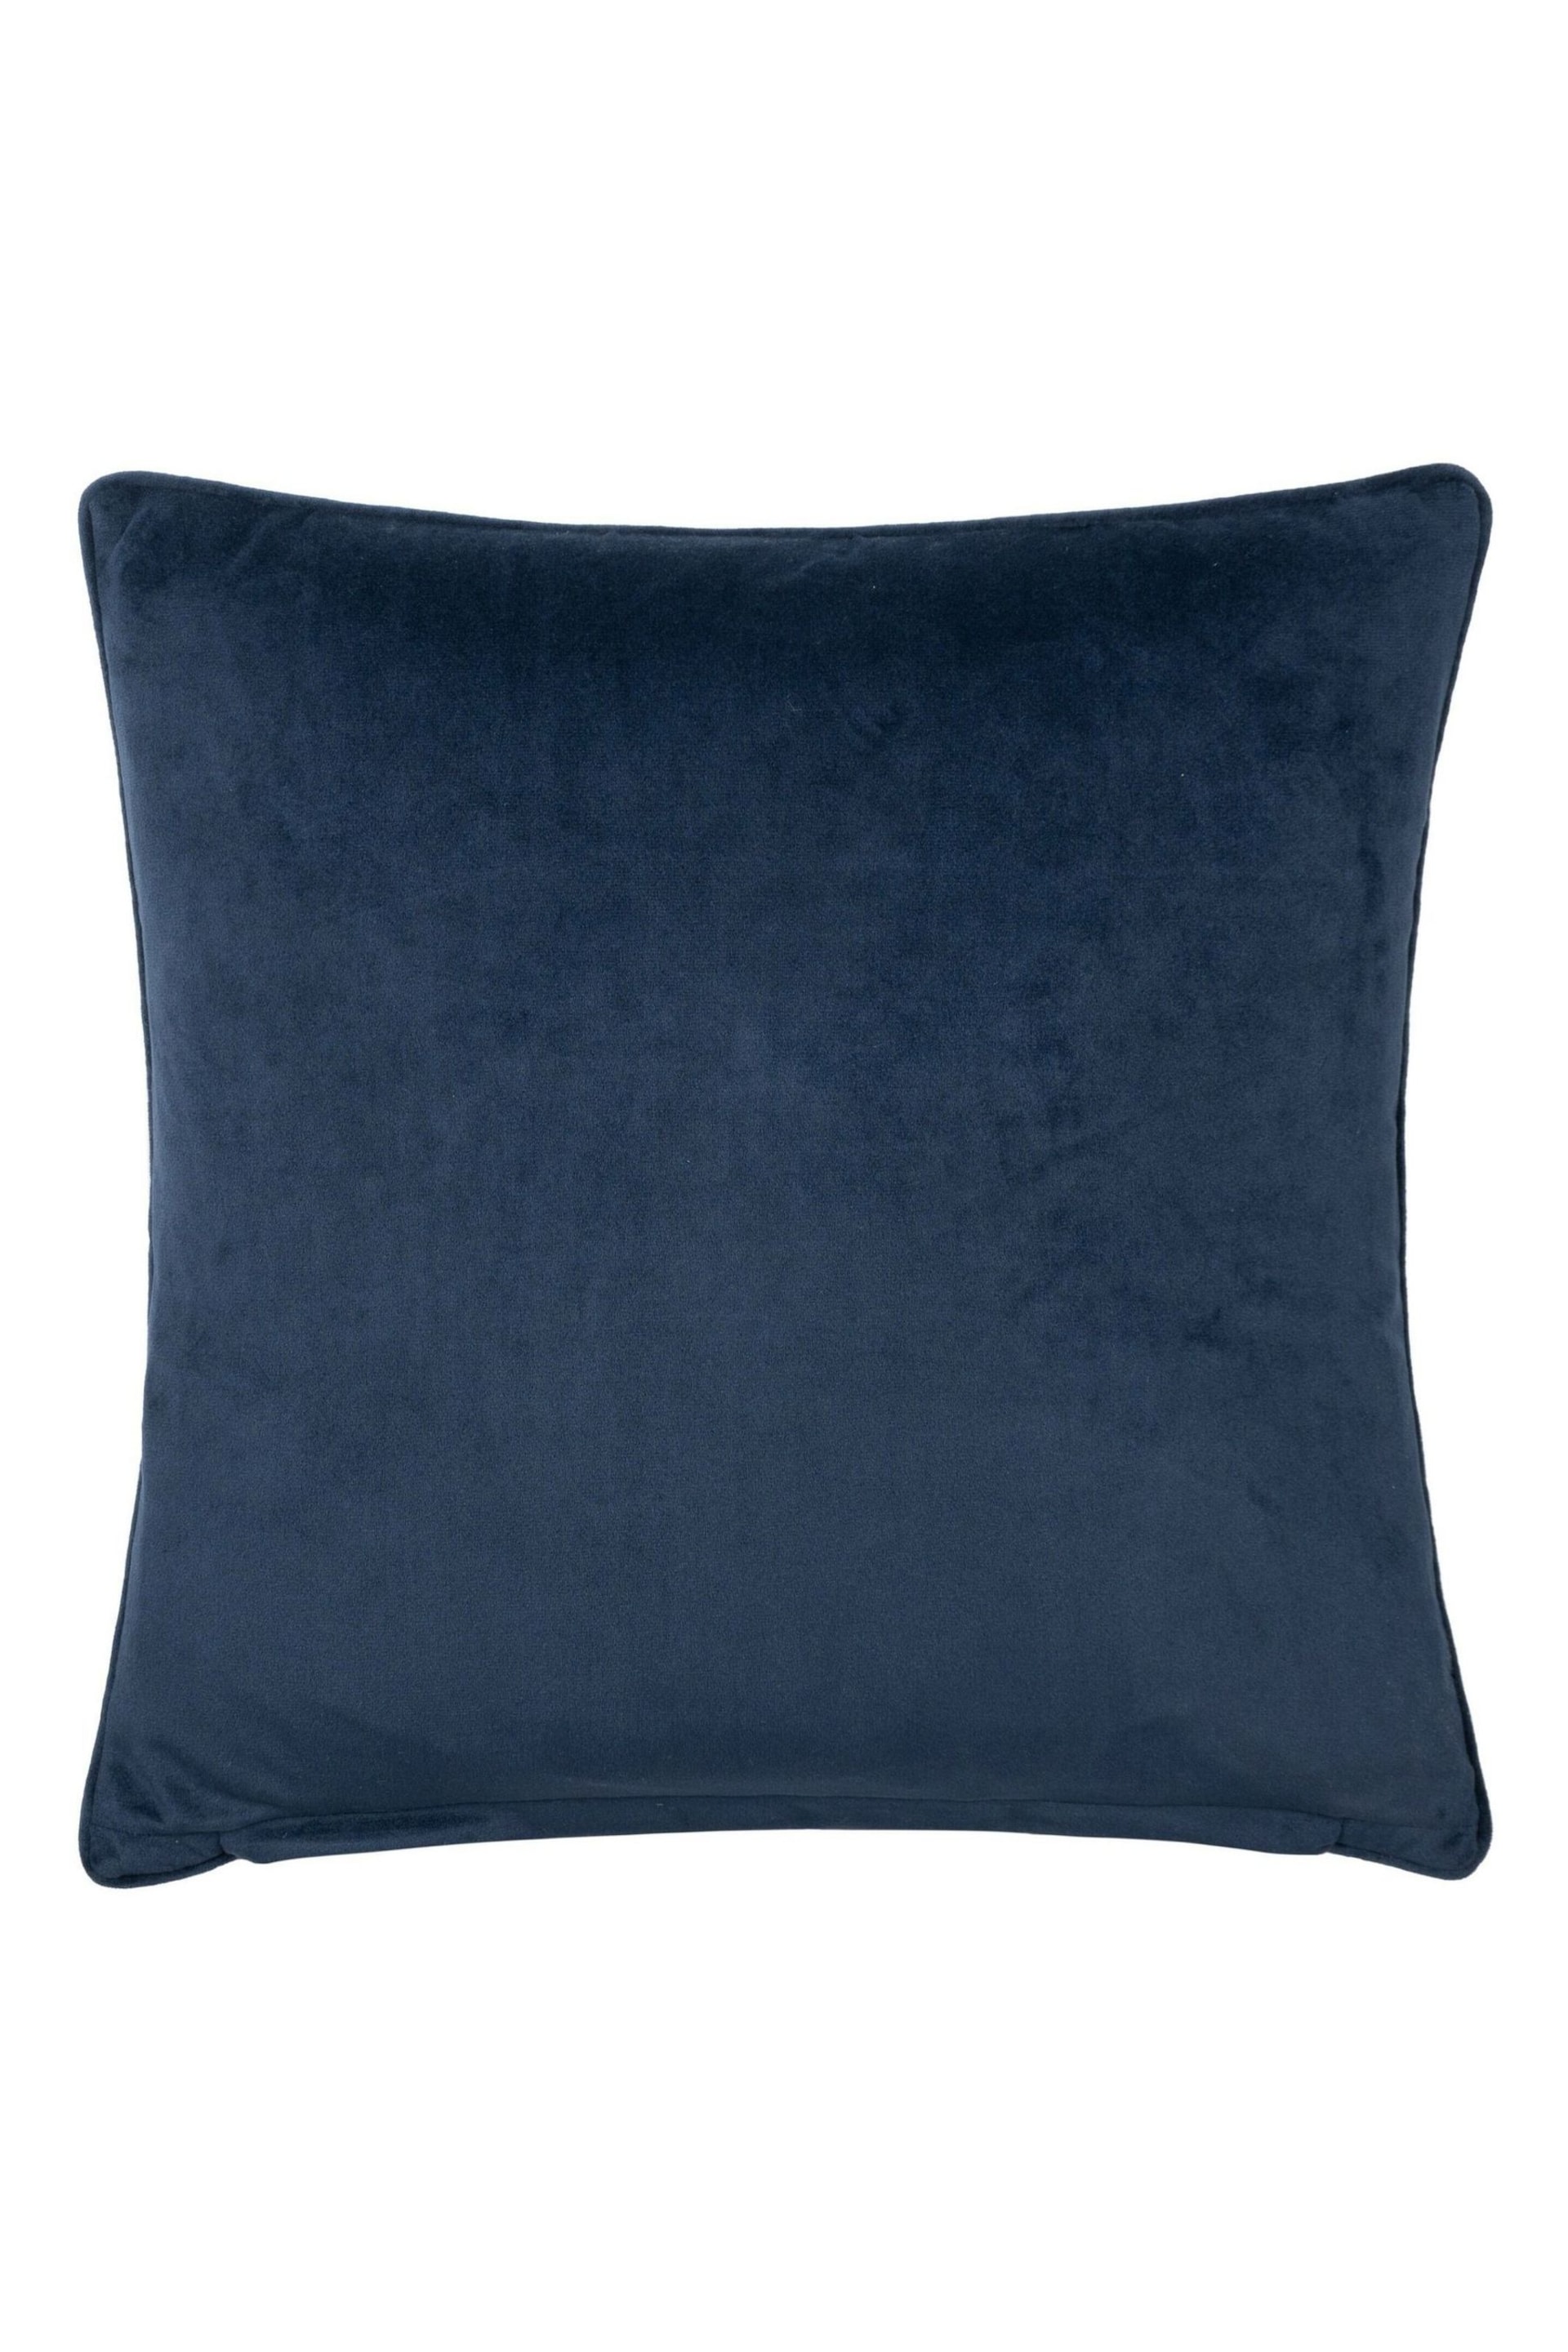 Paoletti Blue Stratus Jacquard Polyester Filled Cushion - Image 3 of 5